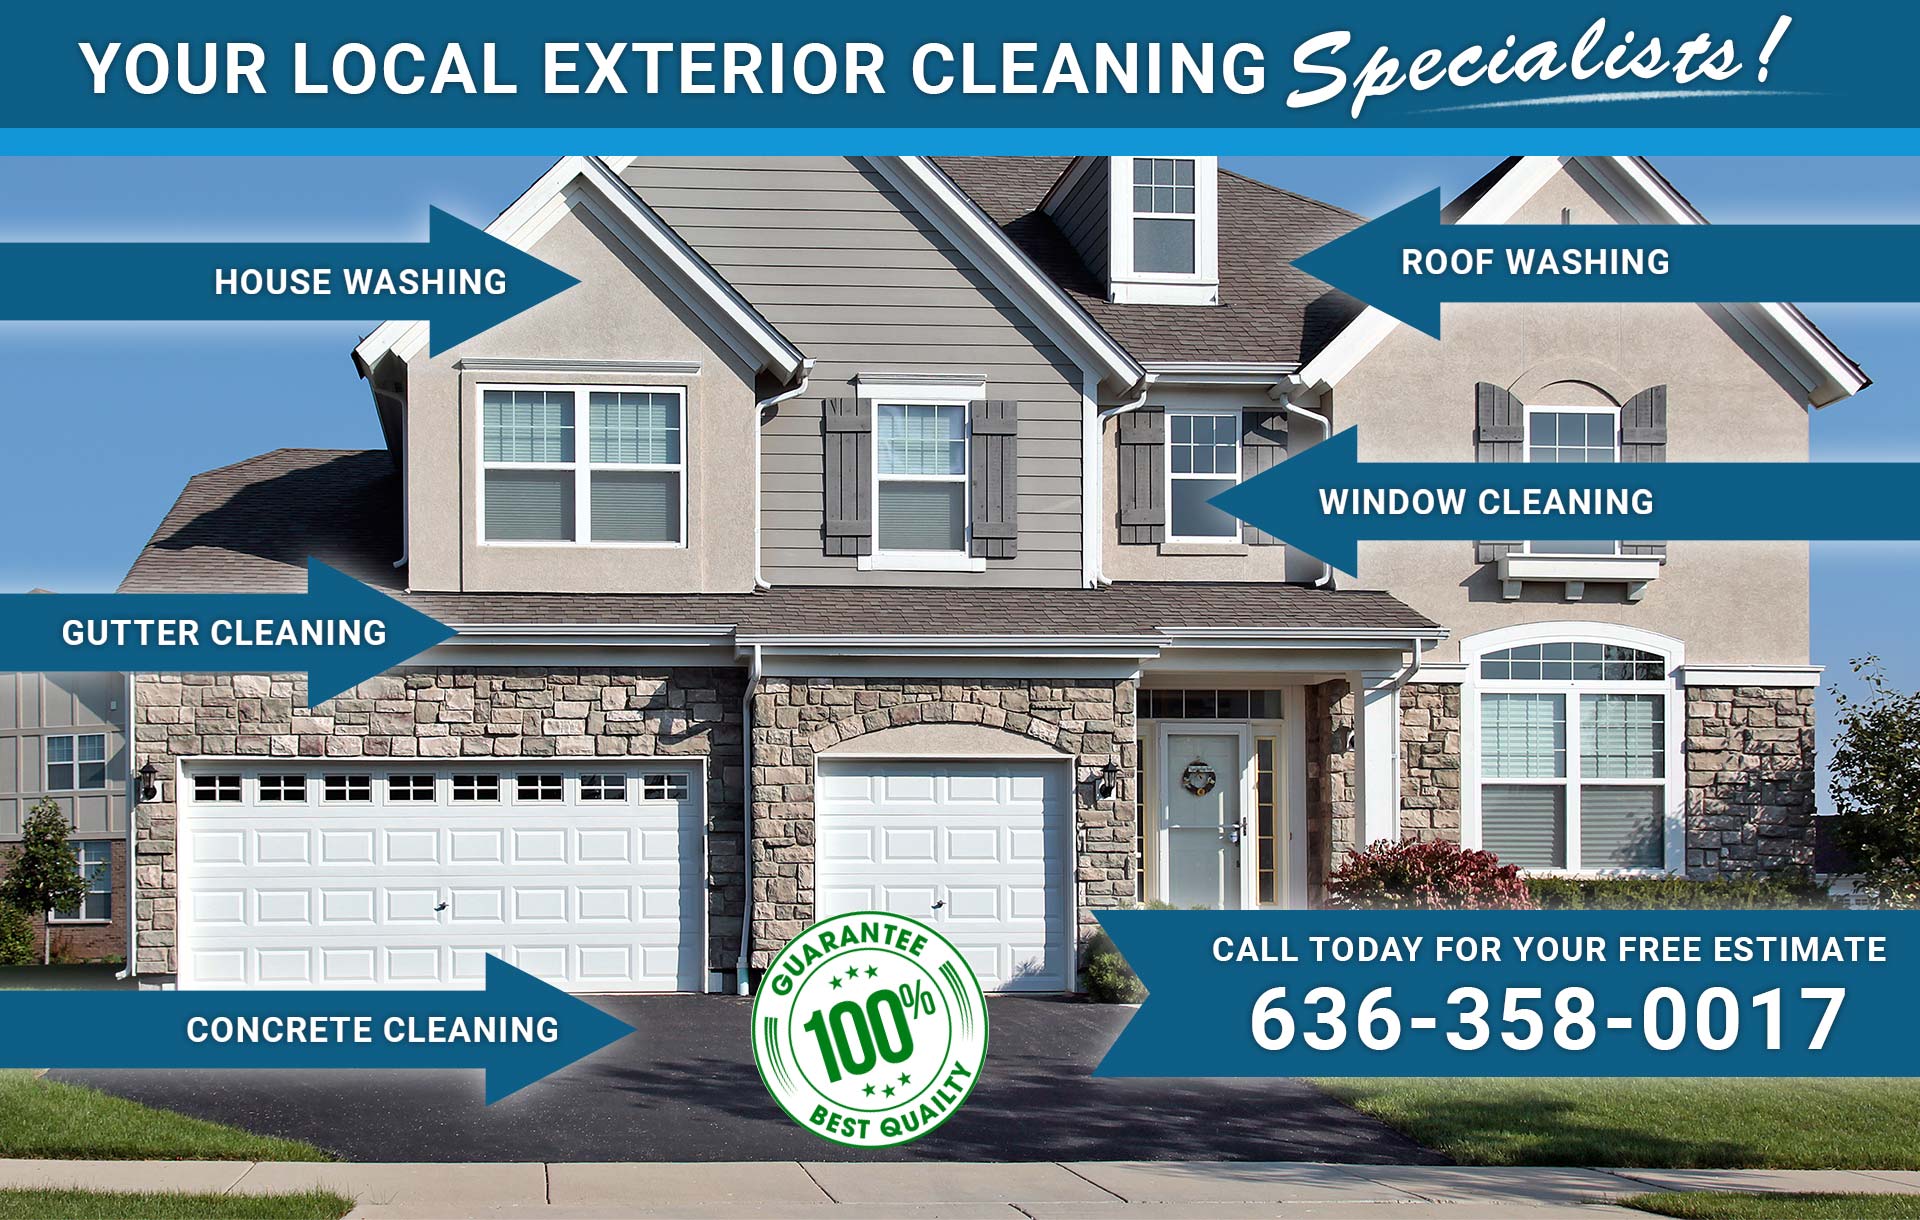 Your local exterior cleaning specialists